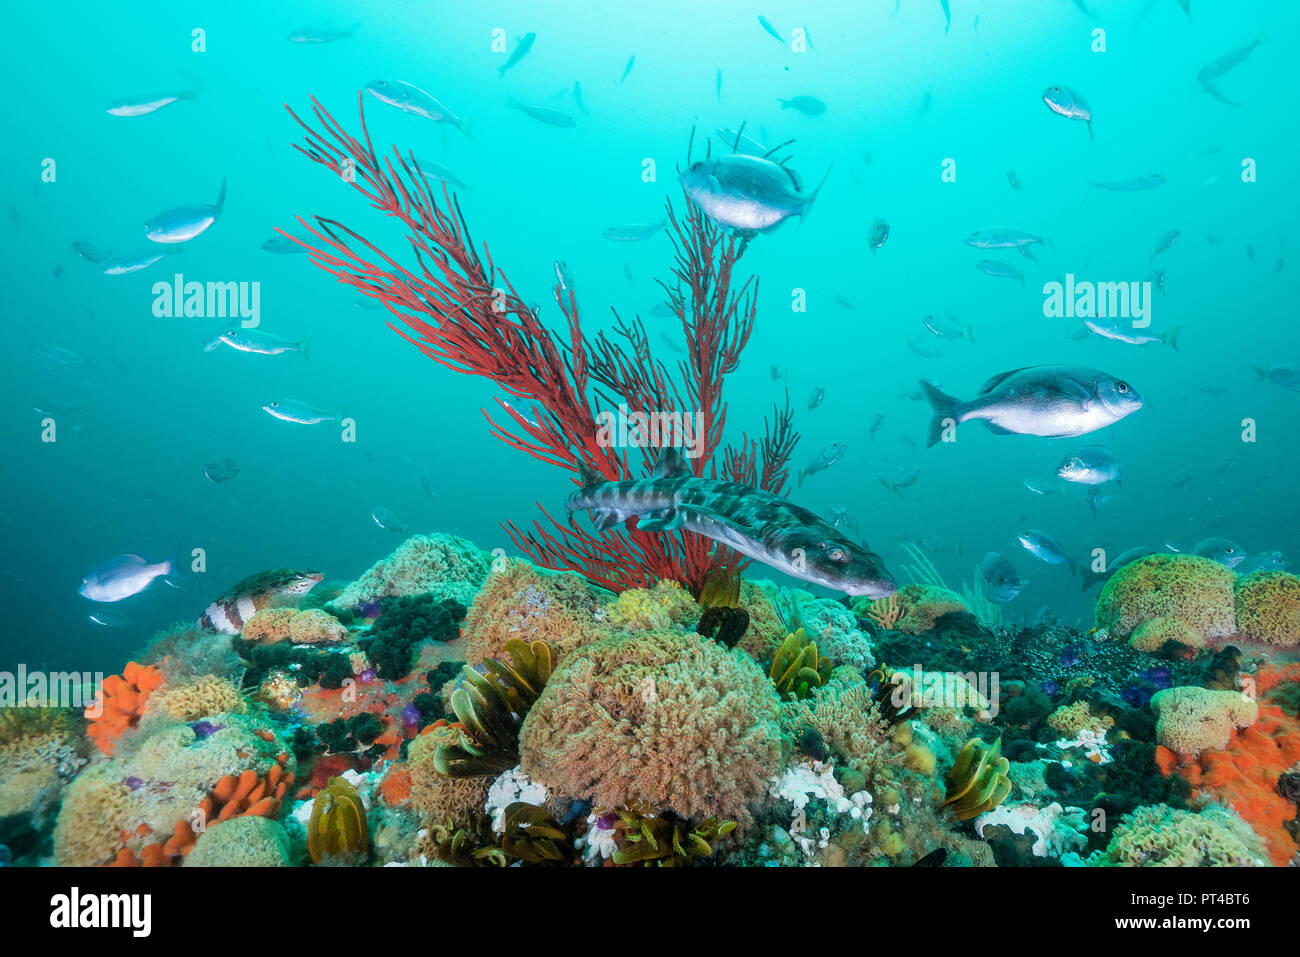 Striped pyjama cat shark swims over the coral reef. Stock Photo